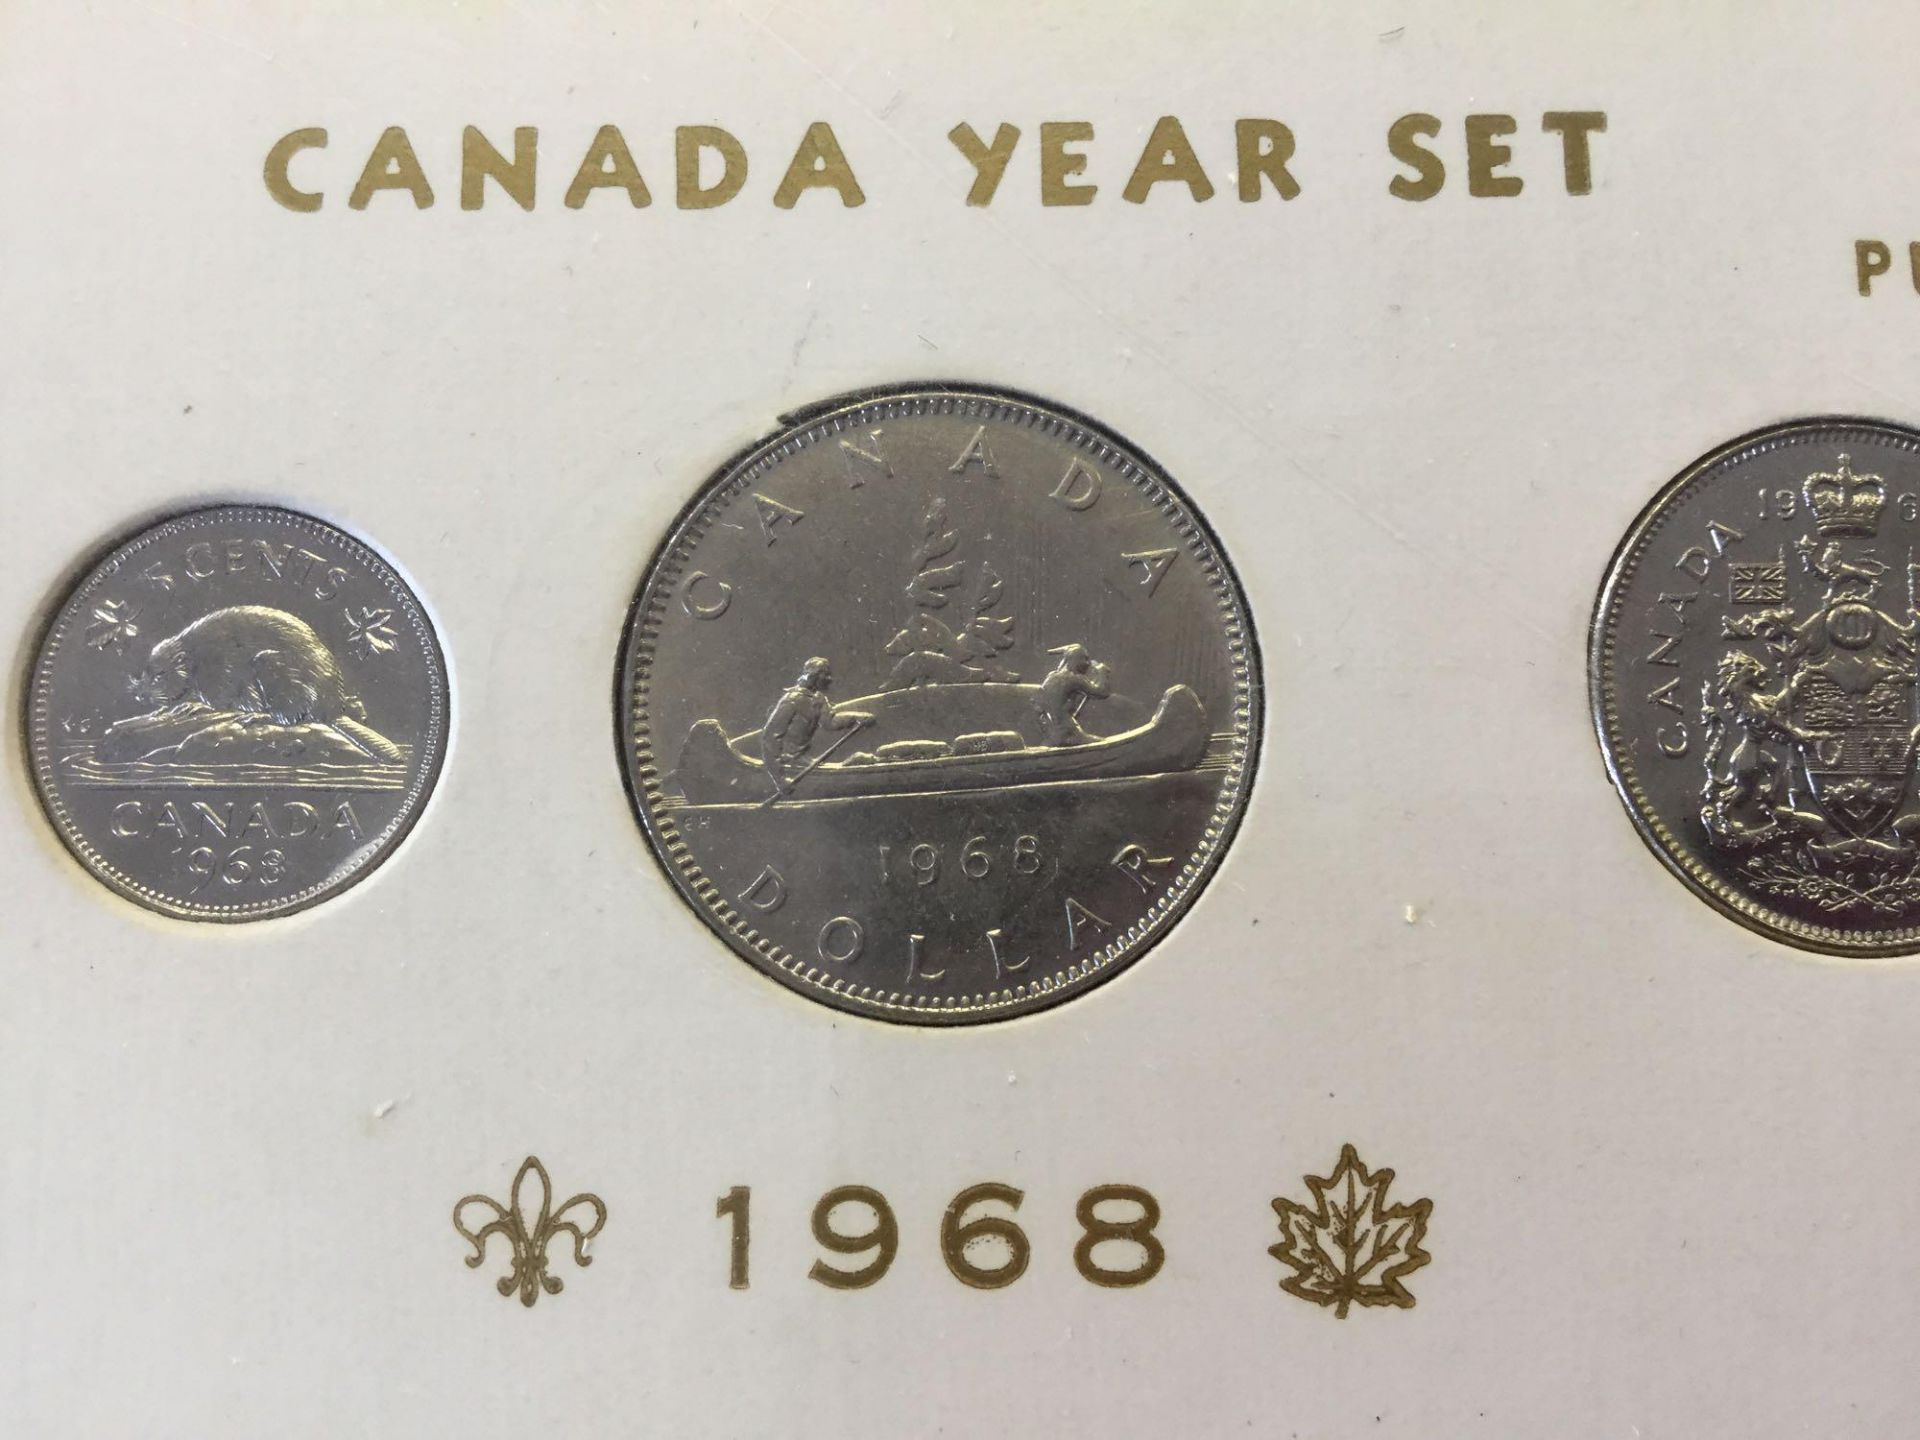 1968 Canada Year Set - Pure Nickle and .500 Silver - Image 2 of 3